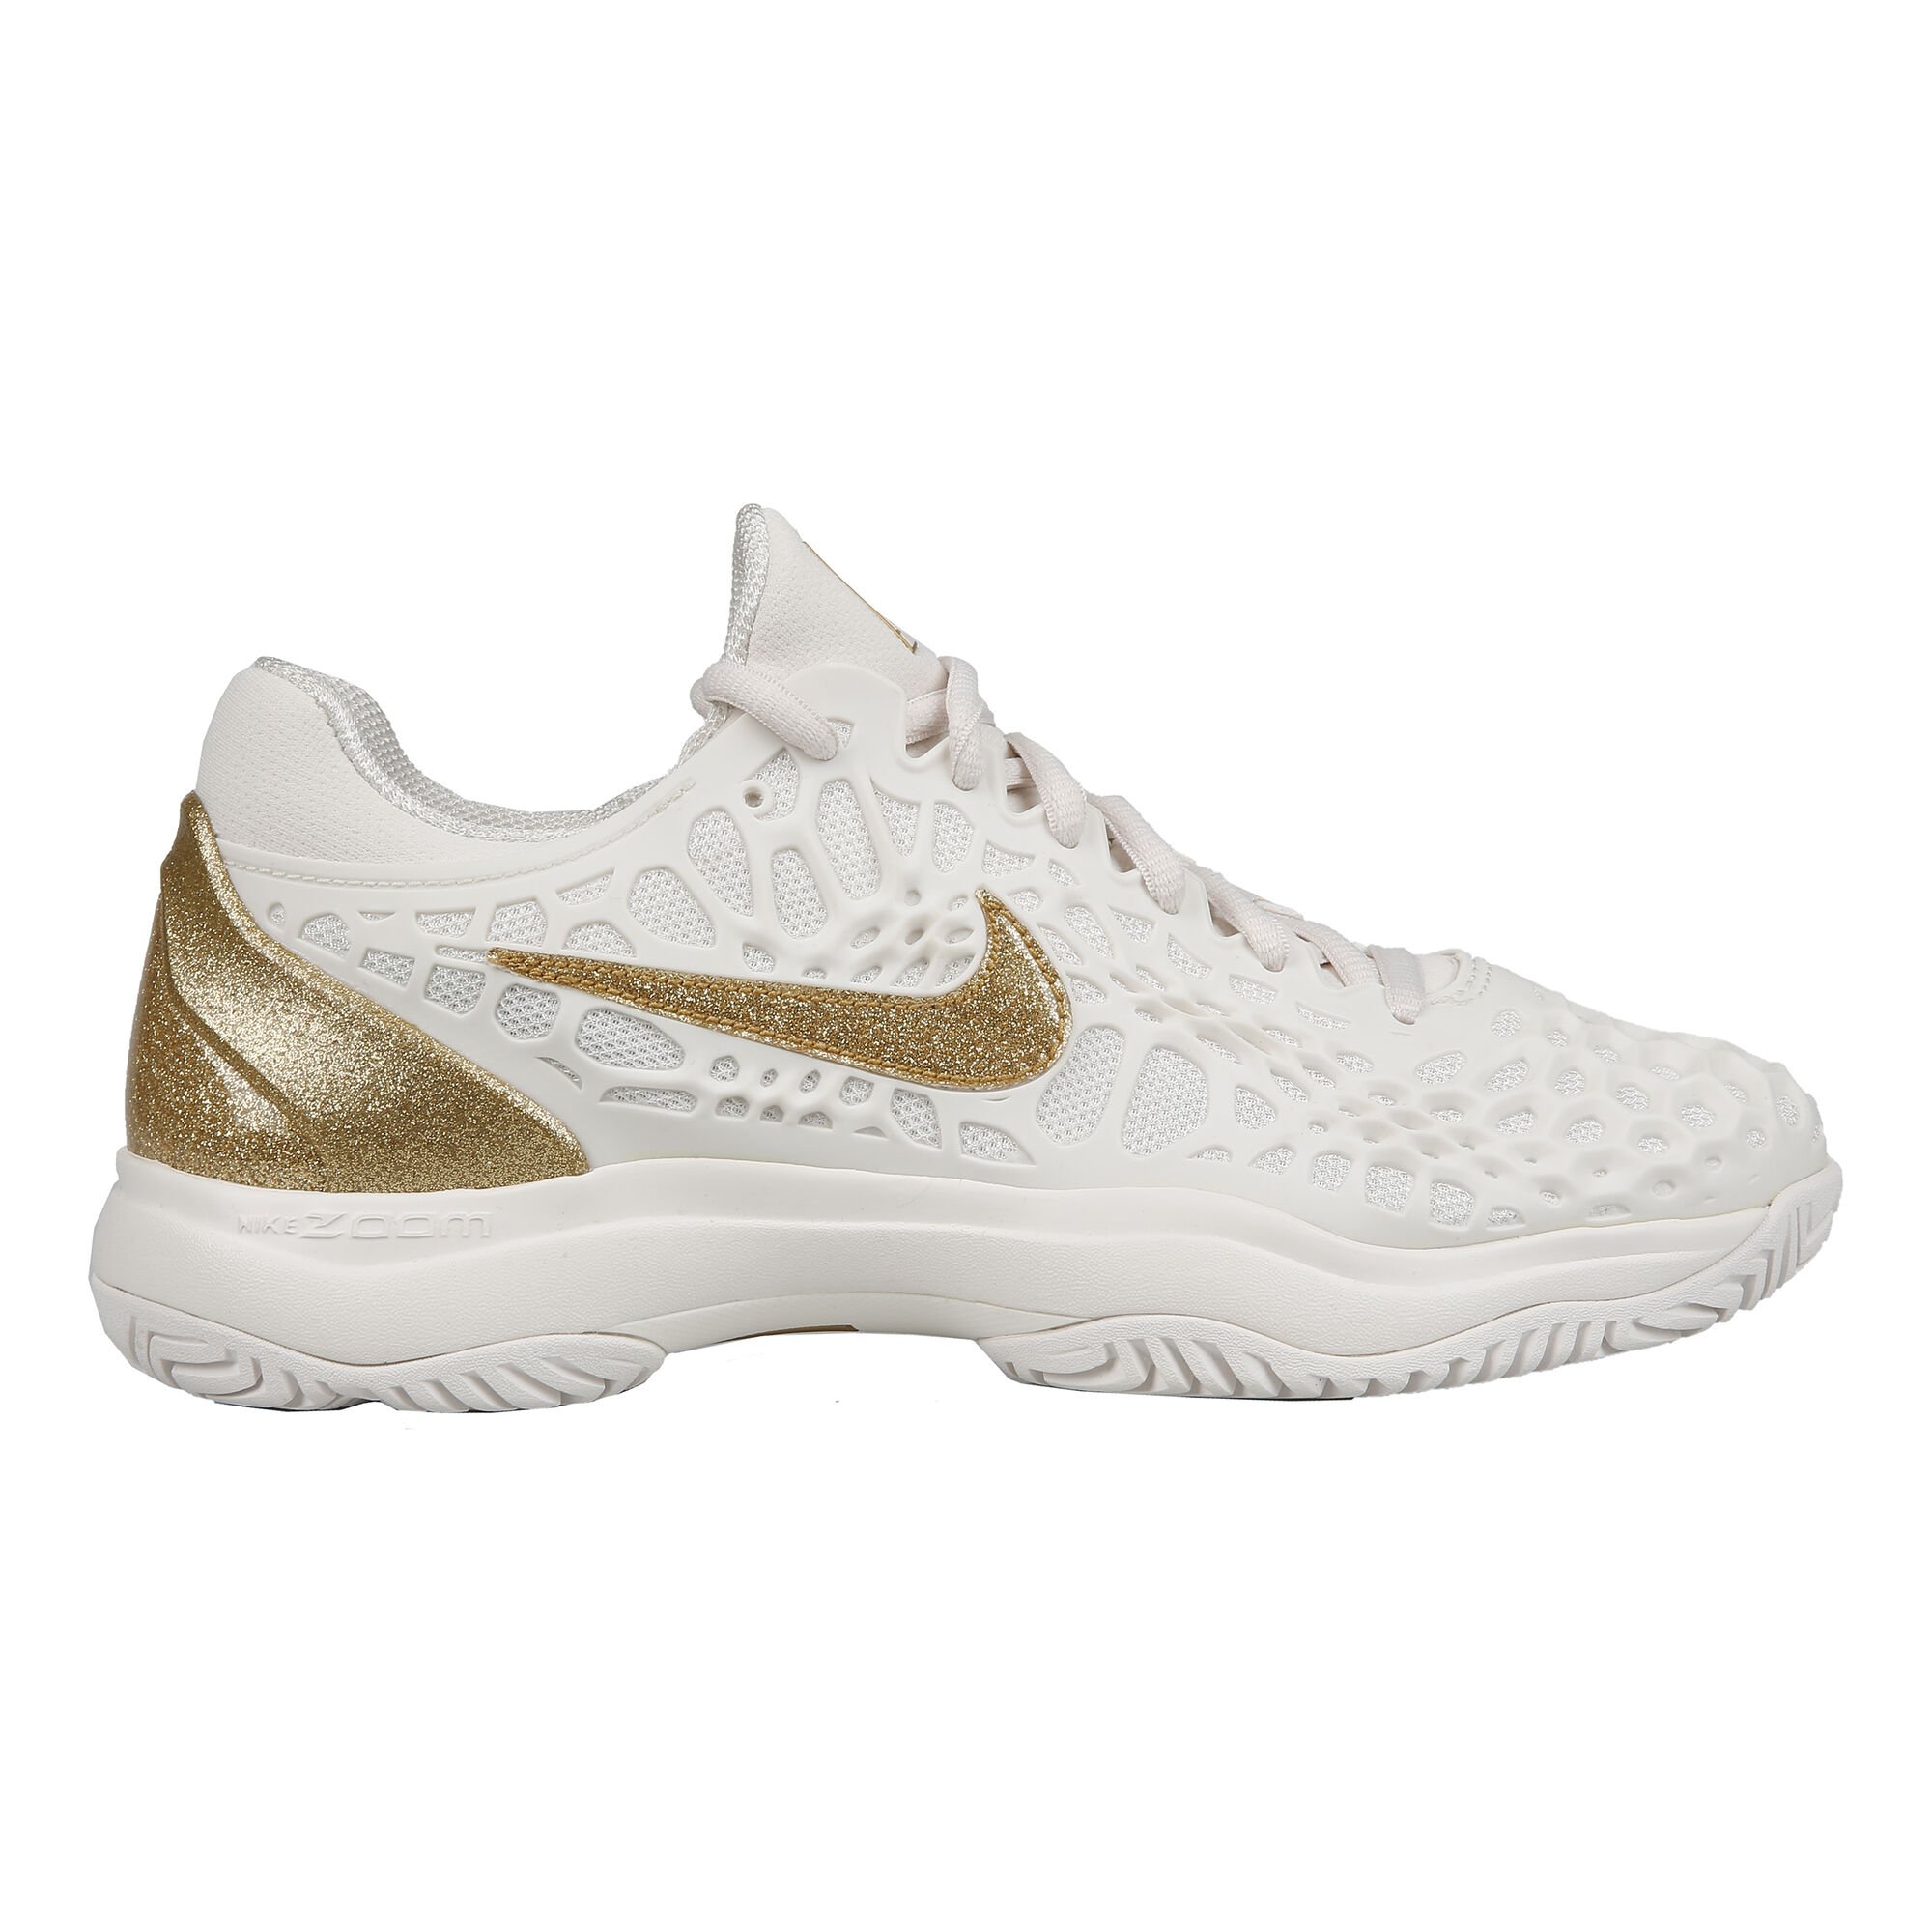 buy Nike Zoom Cage 3 All Court Shoe Women - White, Gold online | Tennis